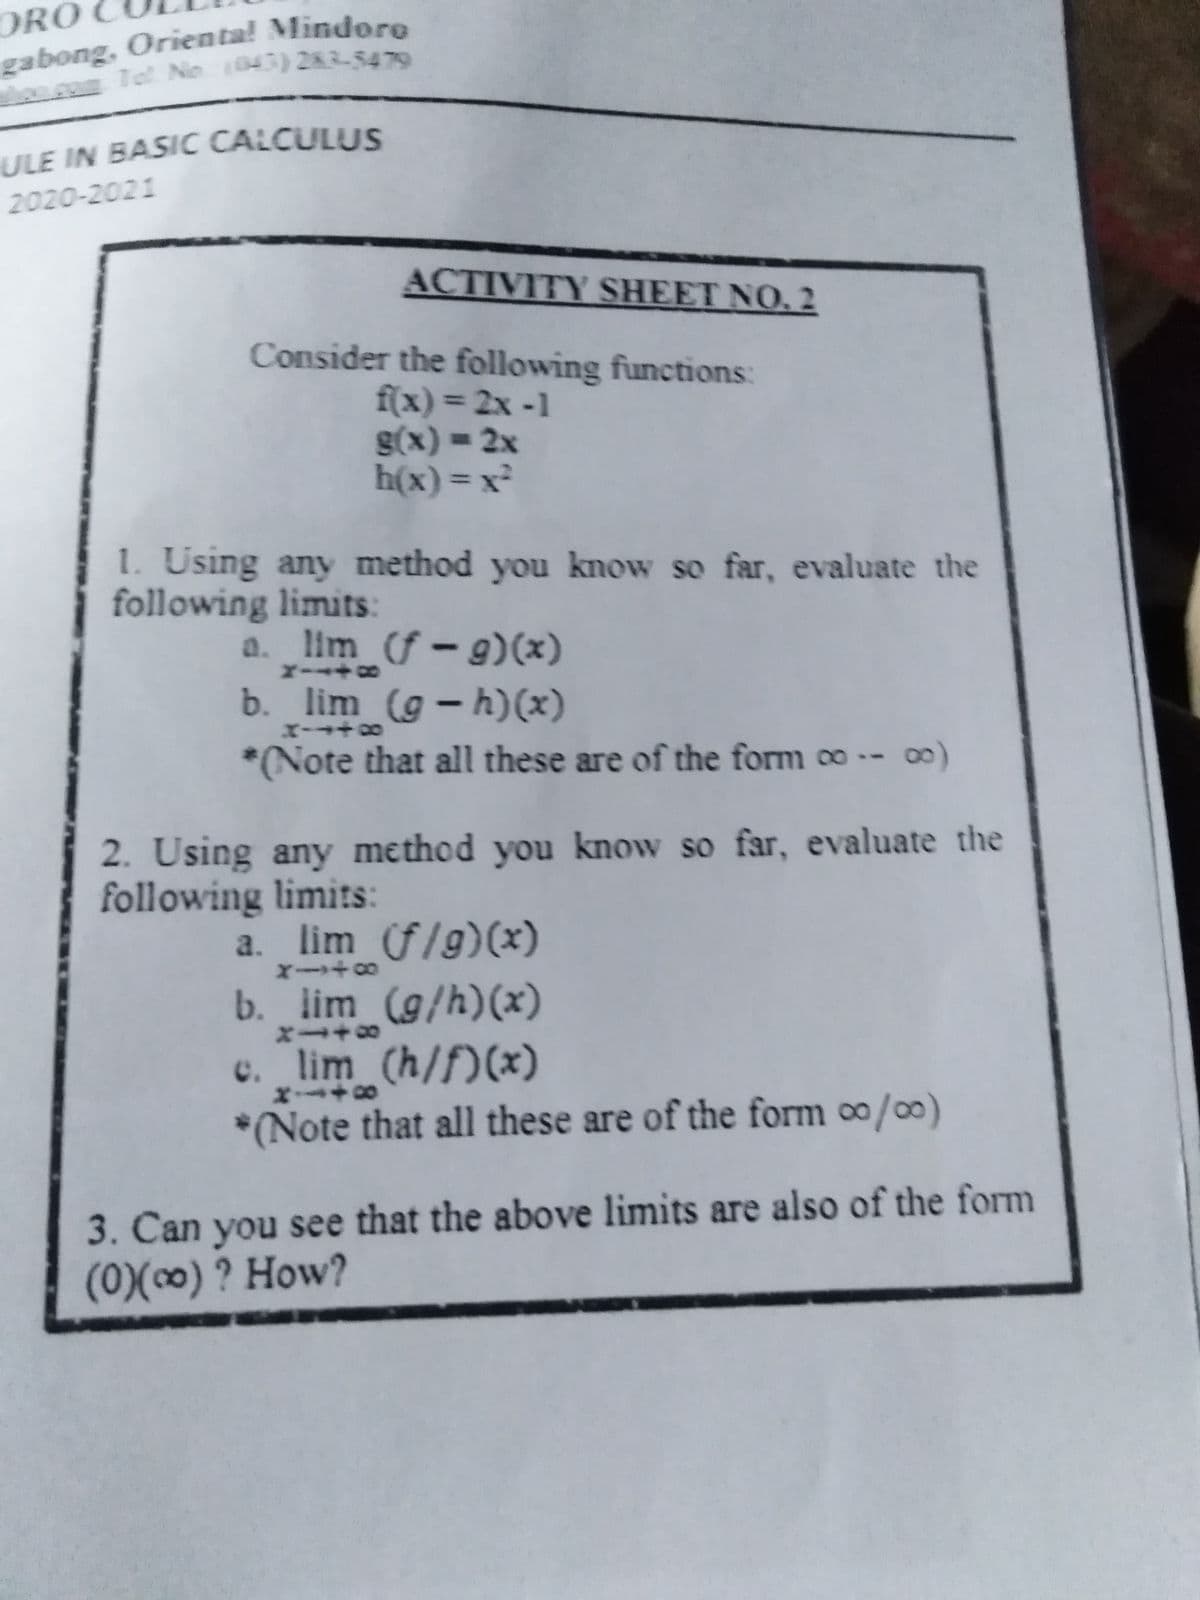 ORO
ULE IN BASIC CALCULUS
2020-2021
ACTIVITY SHEET NO. 2
Consider the following functions:
f(x) 3 2x -1
S(x) = 2x
h(x)= x²
%3D
1. Using any method you know so far, evaluate the
following limits:
a. lim (f – g)(x)
b. lim (g – h)(x)
-
*Note that all these are of the form ∞ -- 0)
2. Using any method you know so far, evaluate the
following limits:
a. lim f/g)(x)
b. lim (g/h)(x)
c. lim (h/f)(x)
*(Note that all these are of the form /)
3. Can you see that the above limits are also of the form
(0)(∞) ? How?
